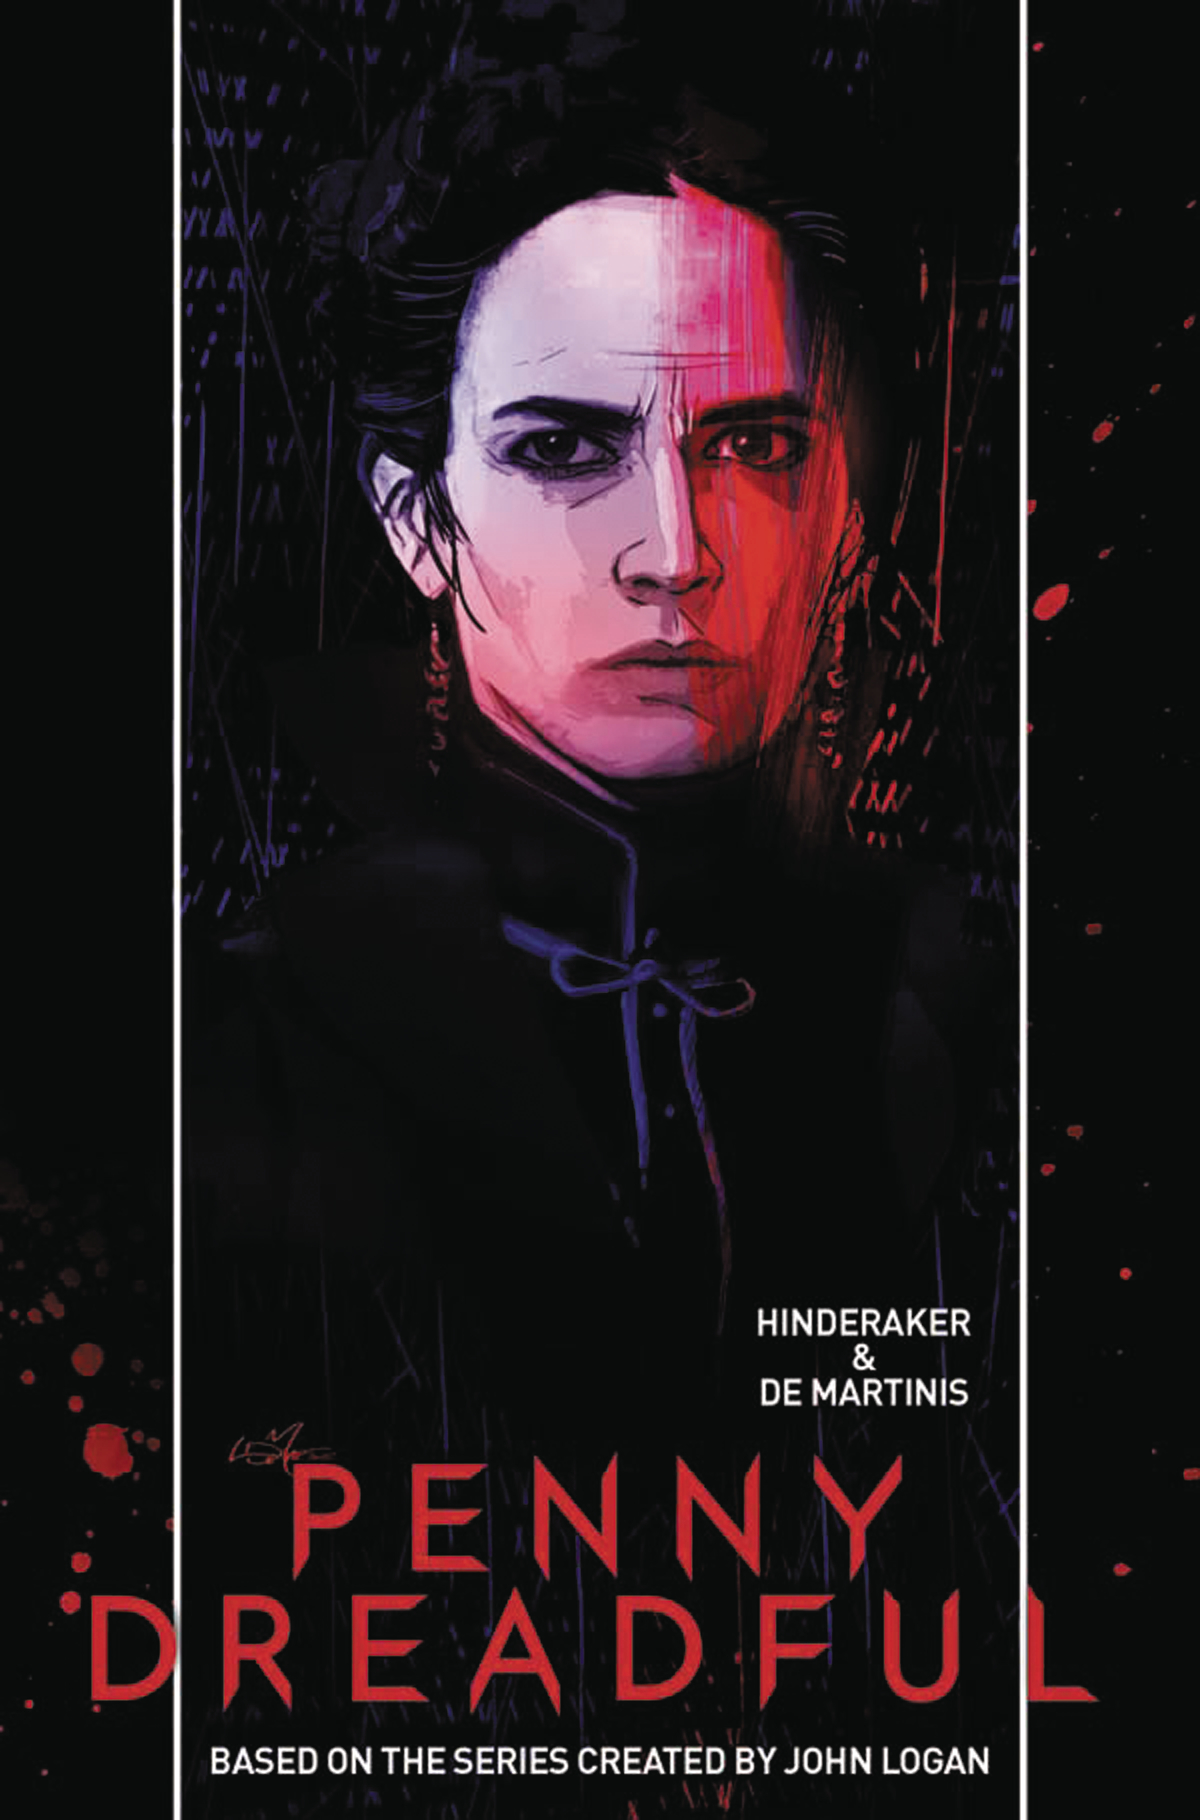 PENNY DREADFUL #3 (OF 5) CONVENTION EXC (MR)